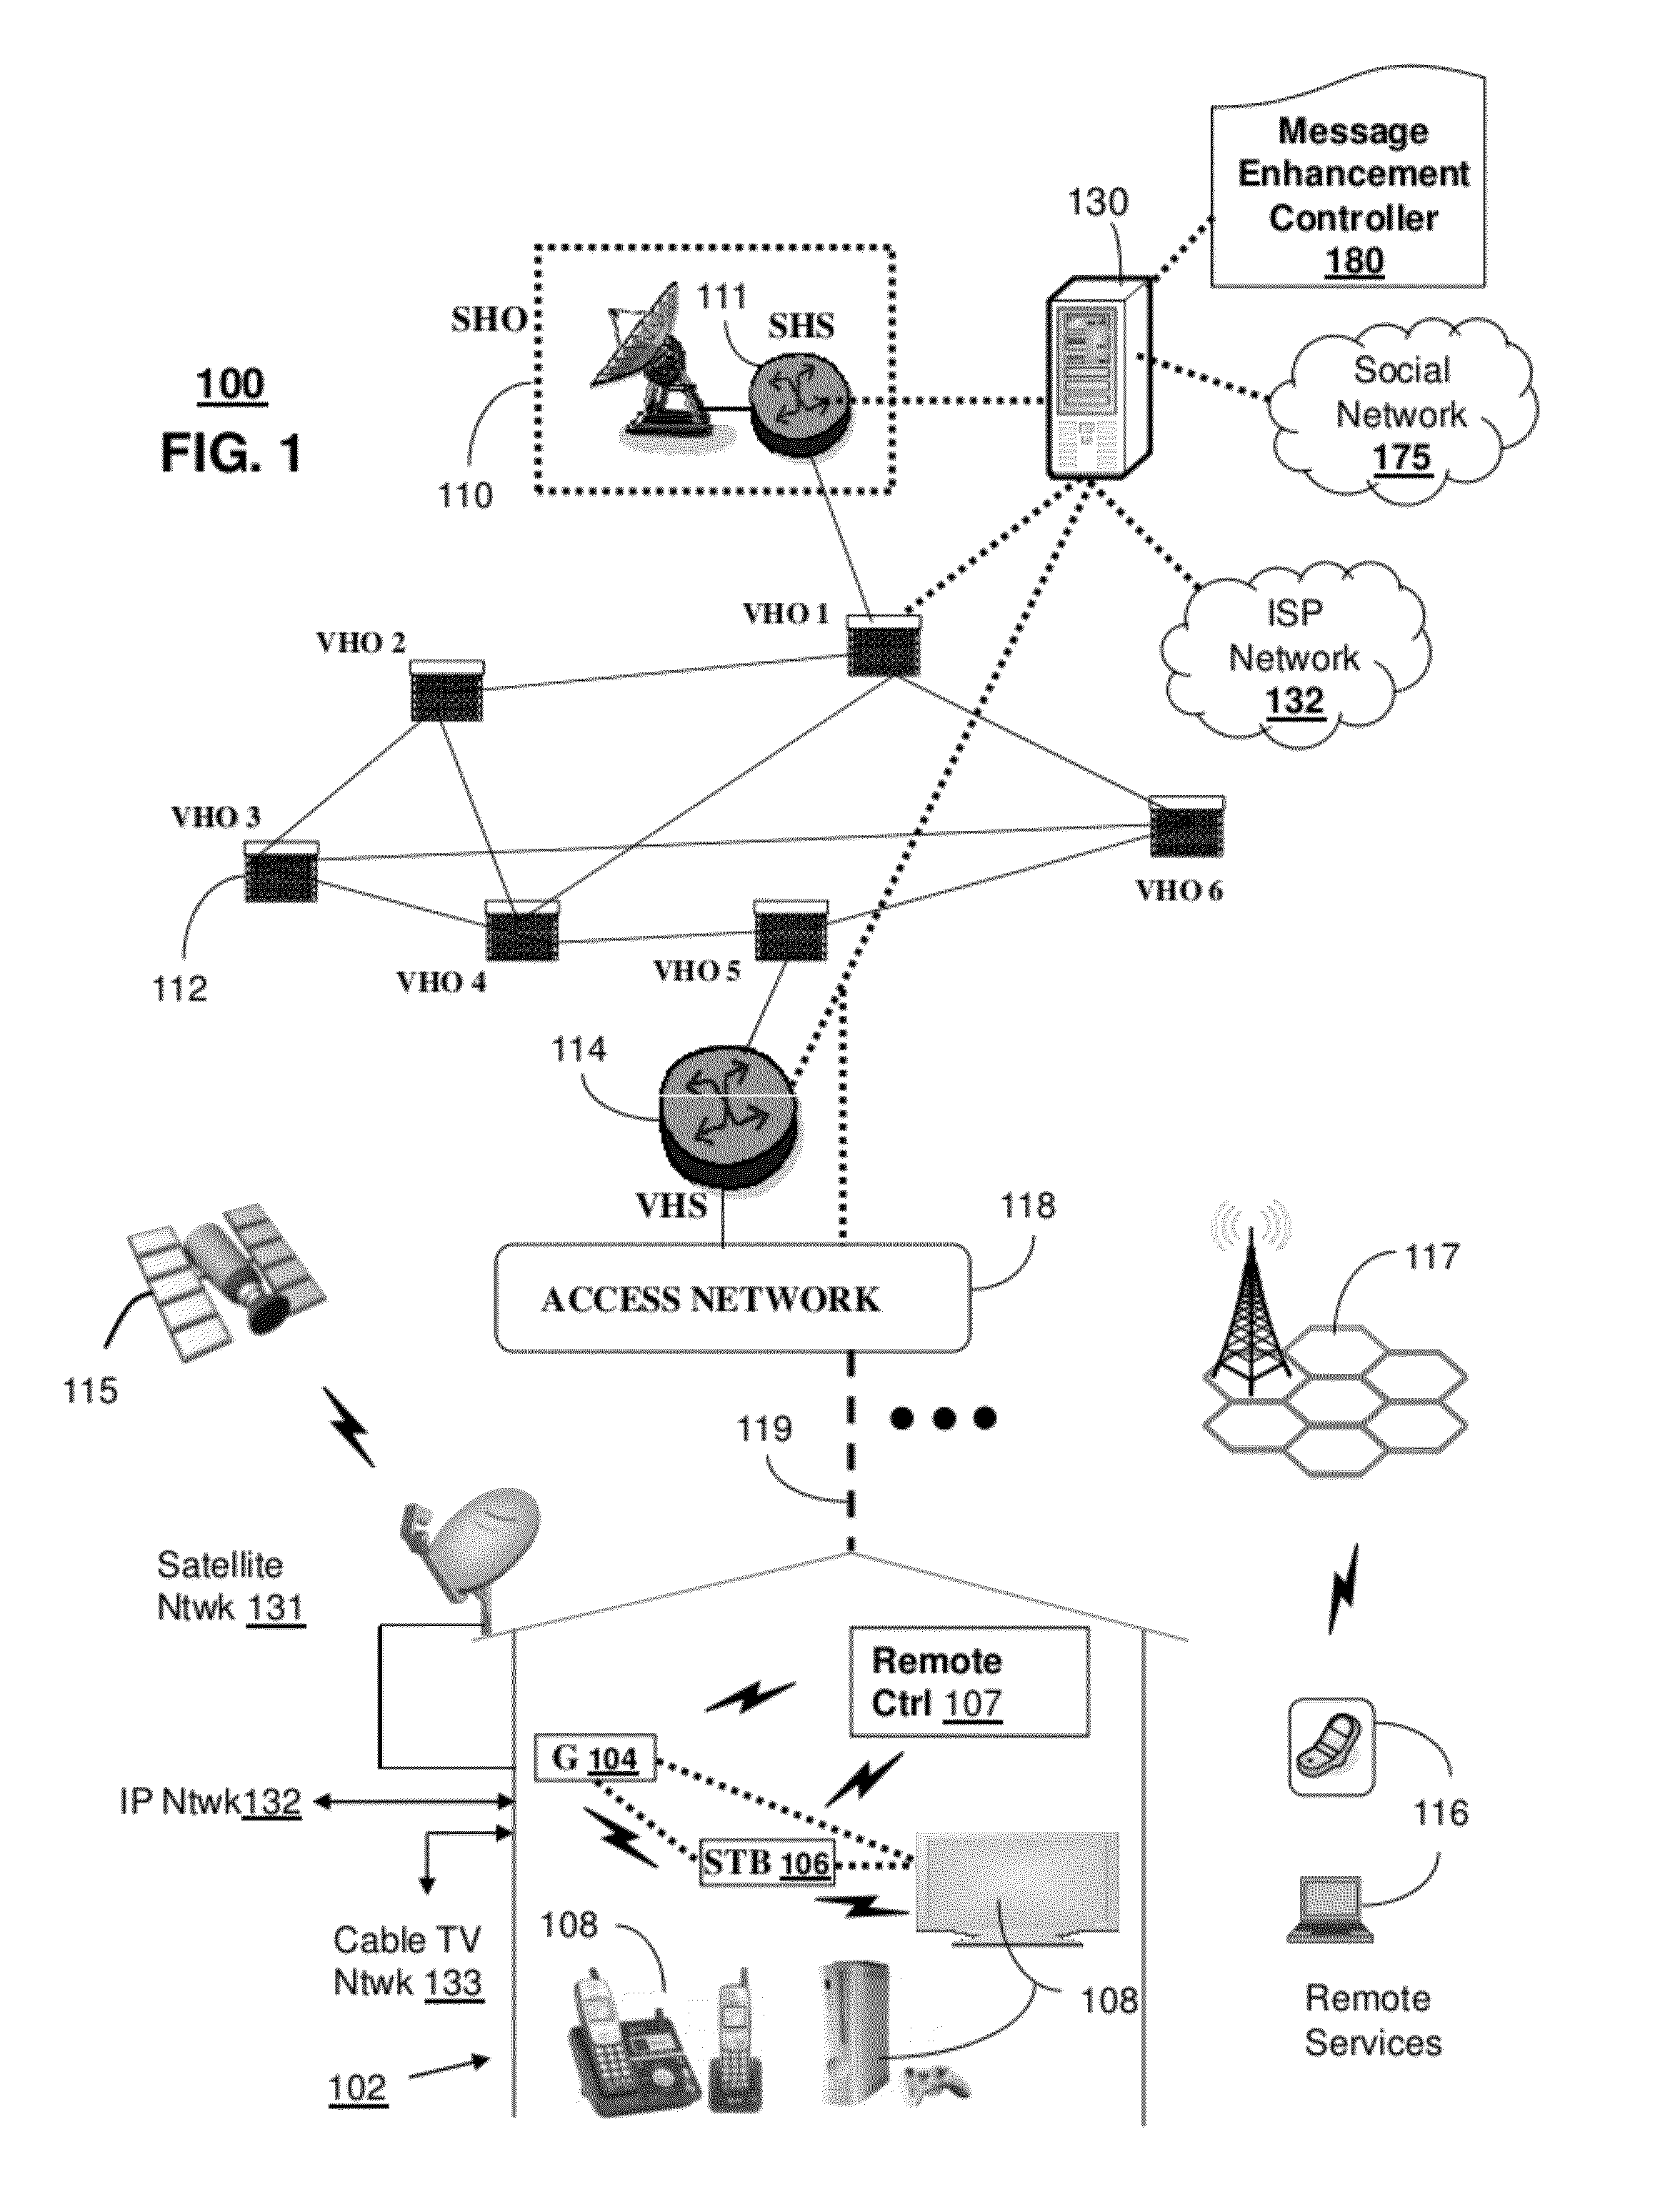 Apparatus and method for providing messages in a social network